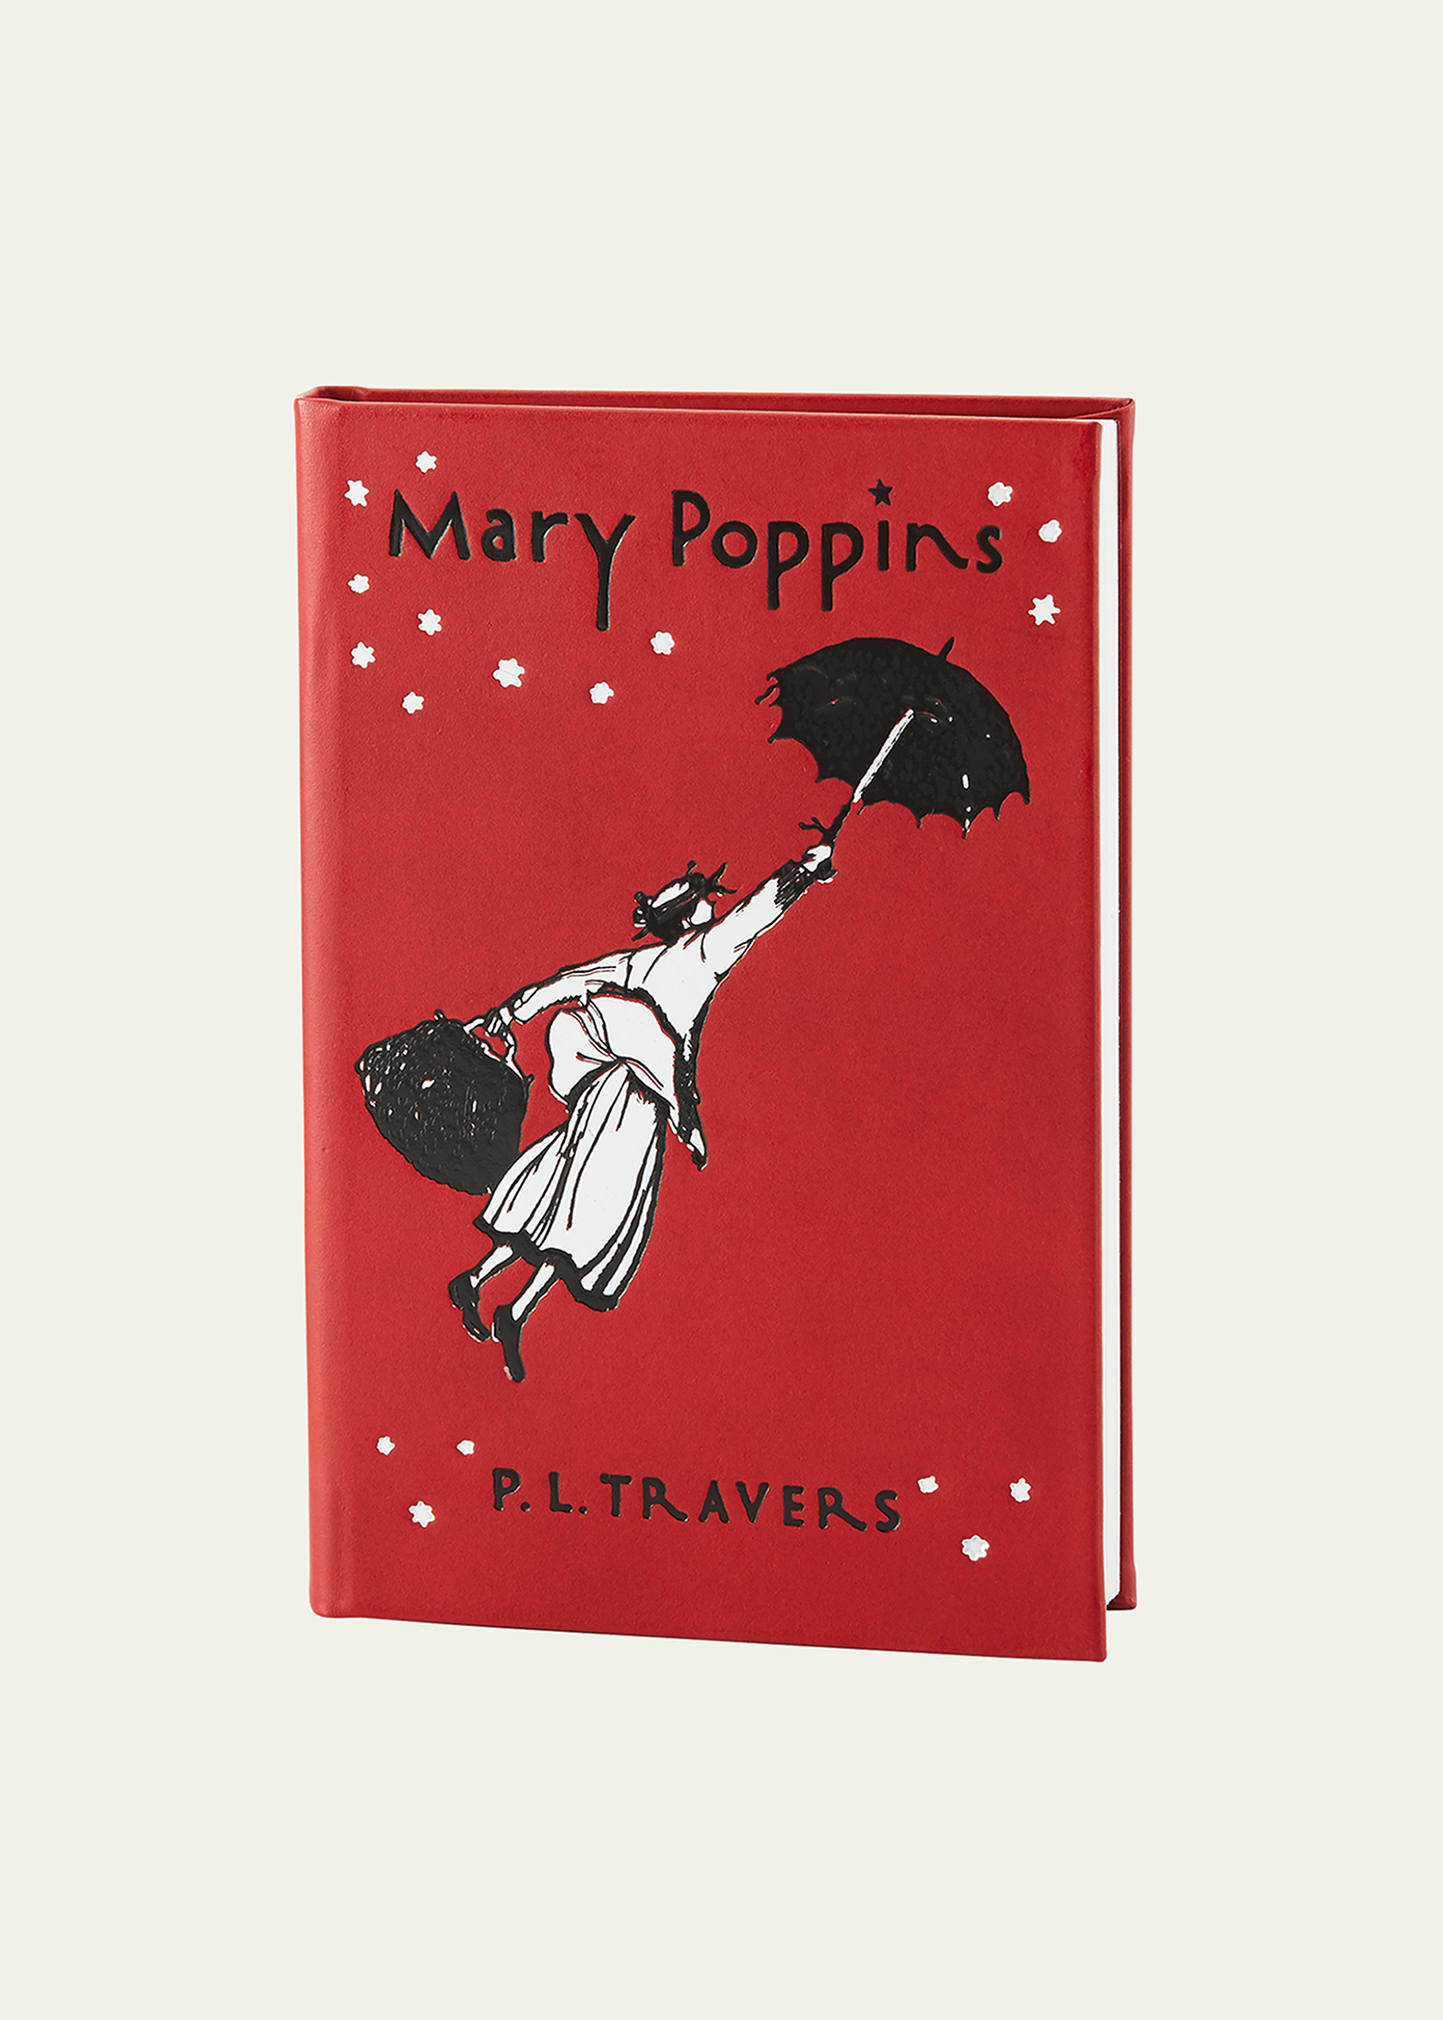 "Mary Poppins" Children's Book by P. L. Travers